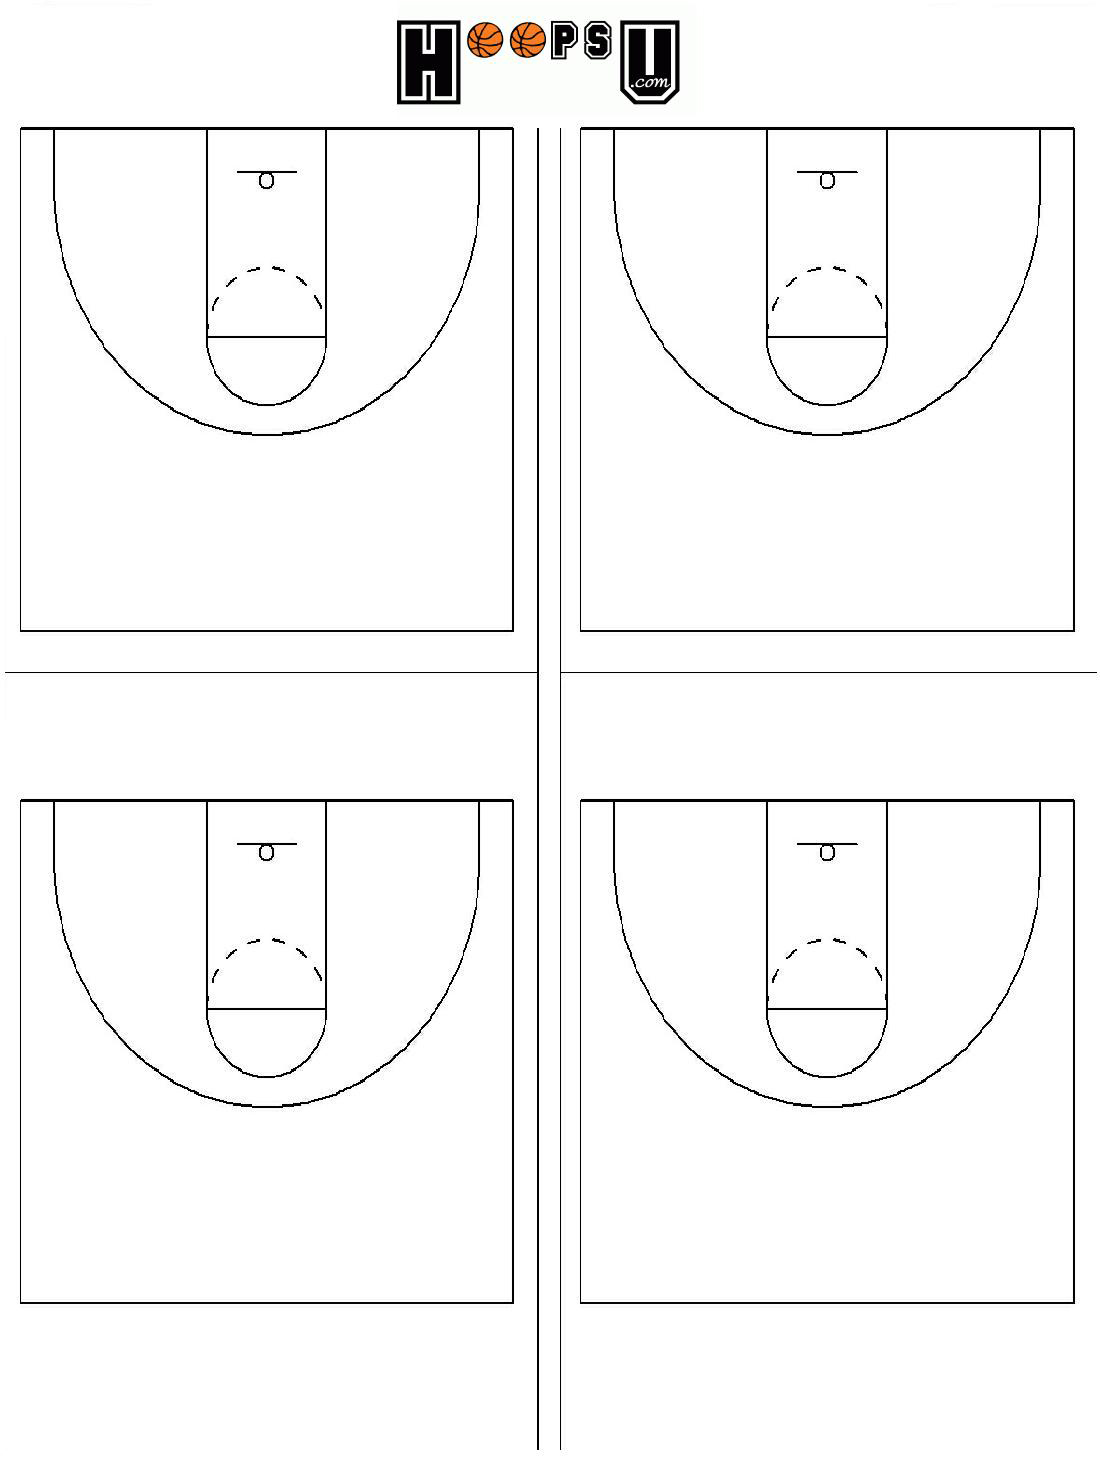 Middle School Basketball Court Dimensions And Measurements